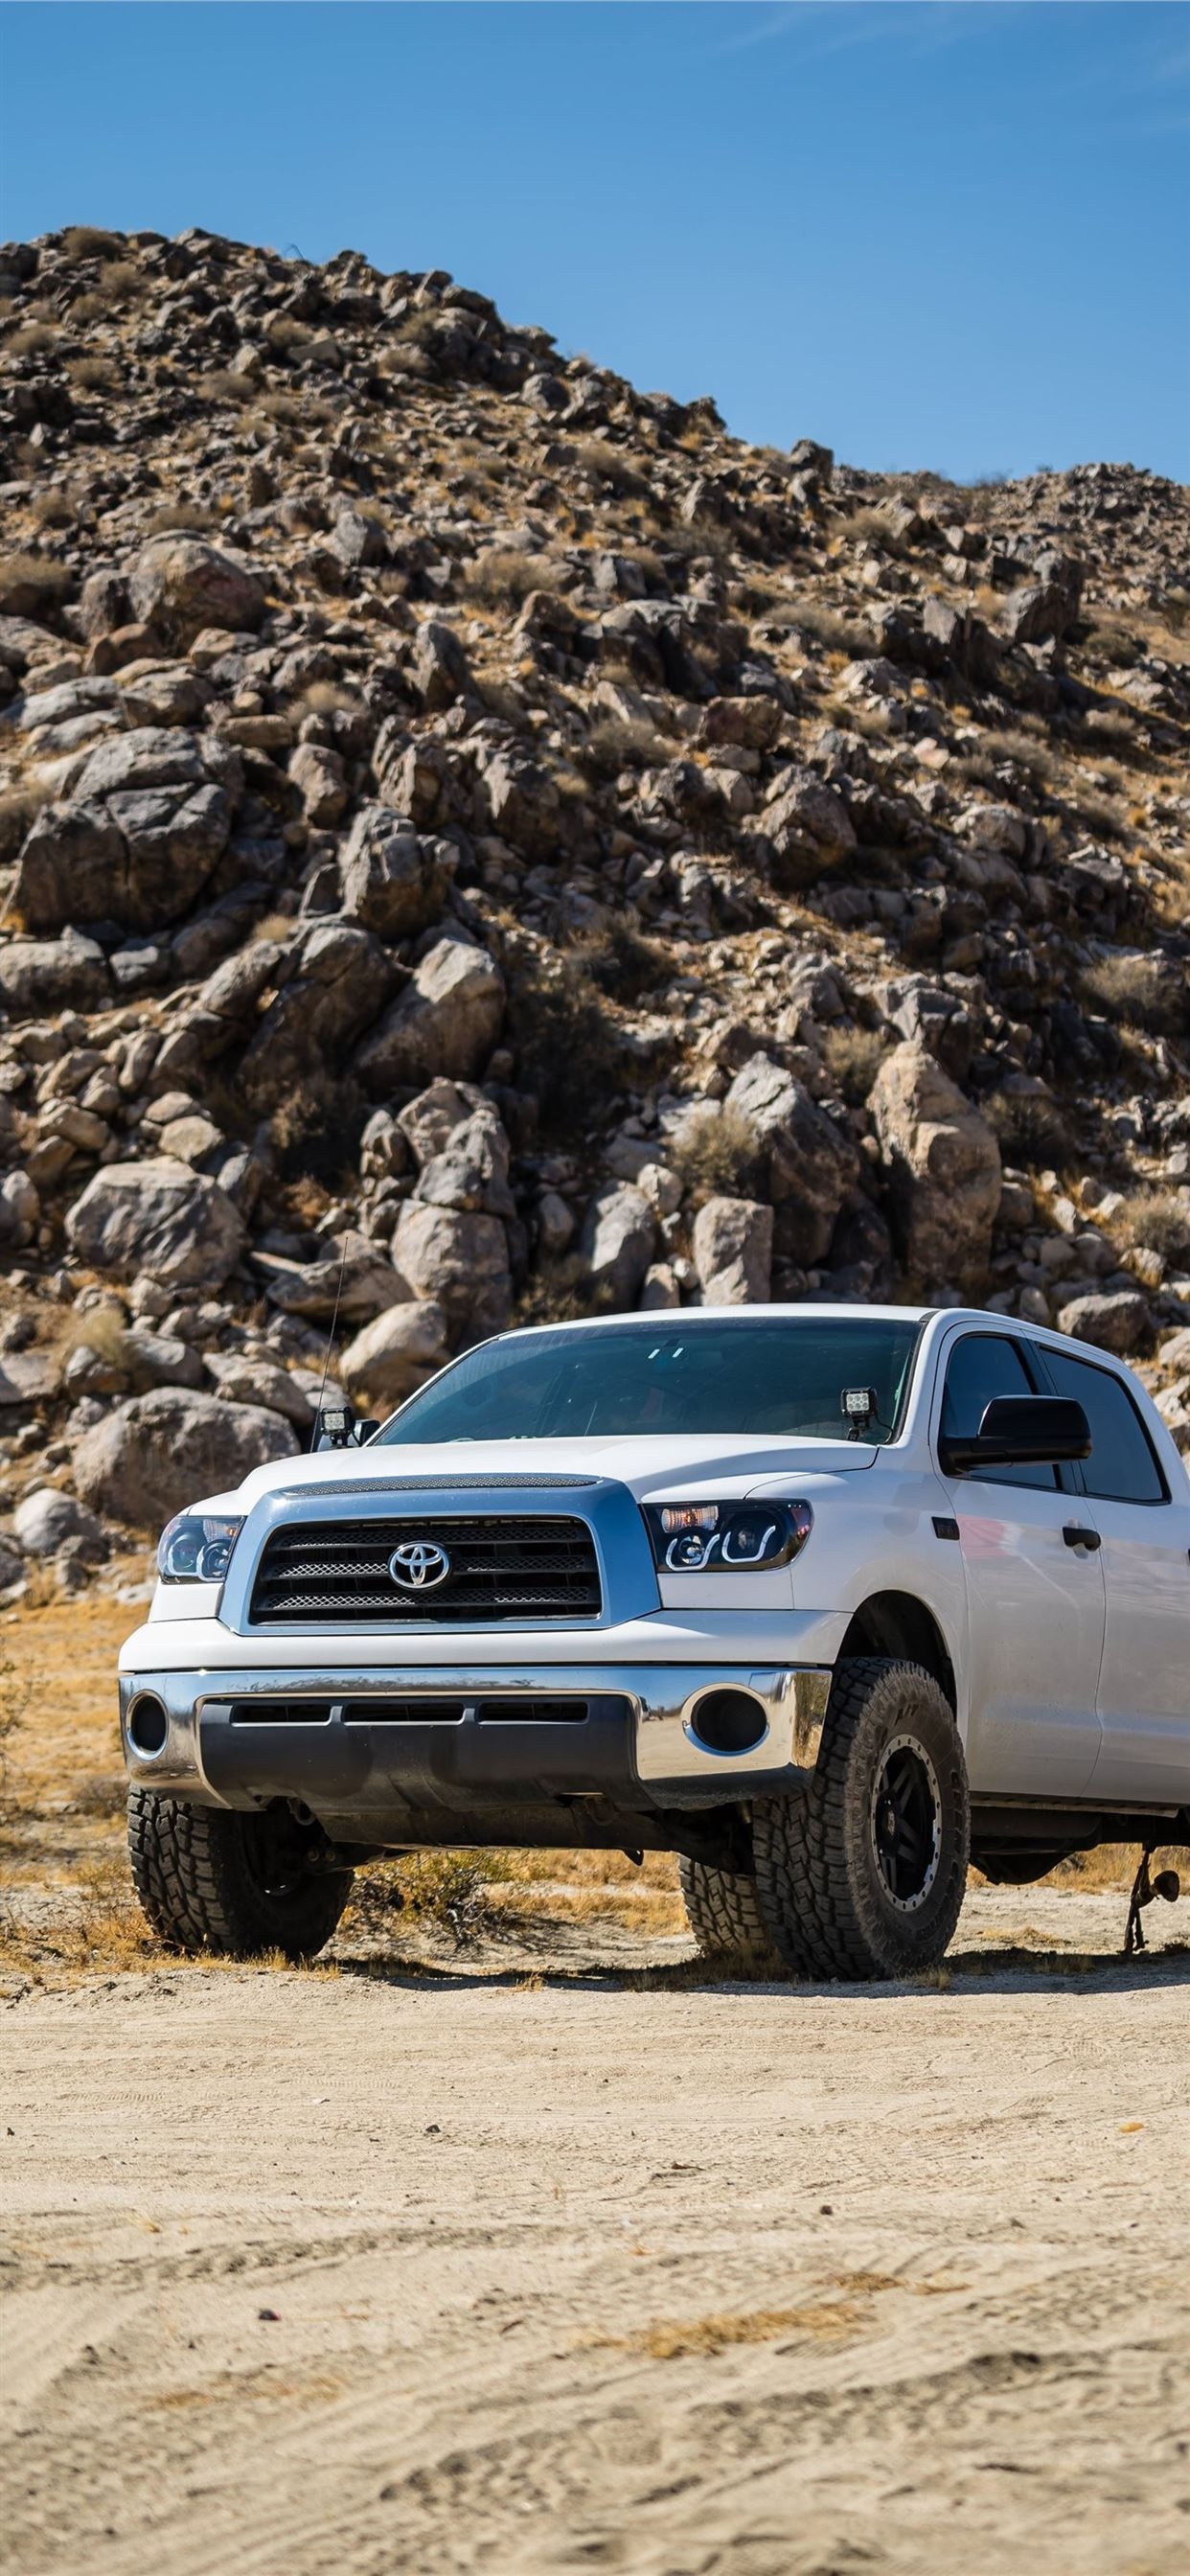 Toyota Tundra, iPhone wallpapers, Free download, Mobile backgrounds, 1250x2690 HD Phone